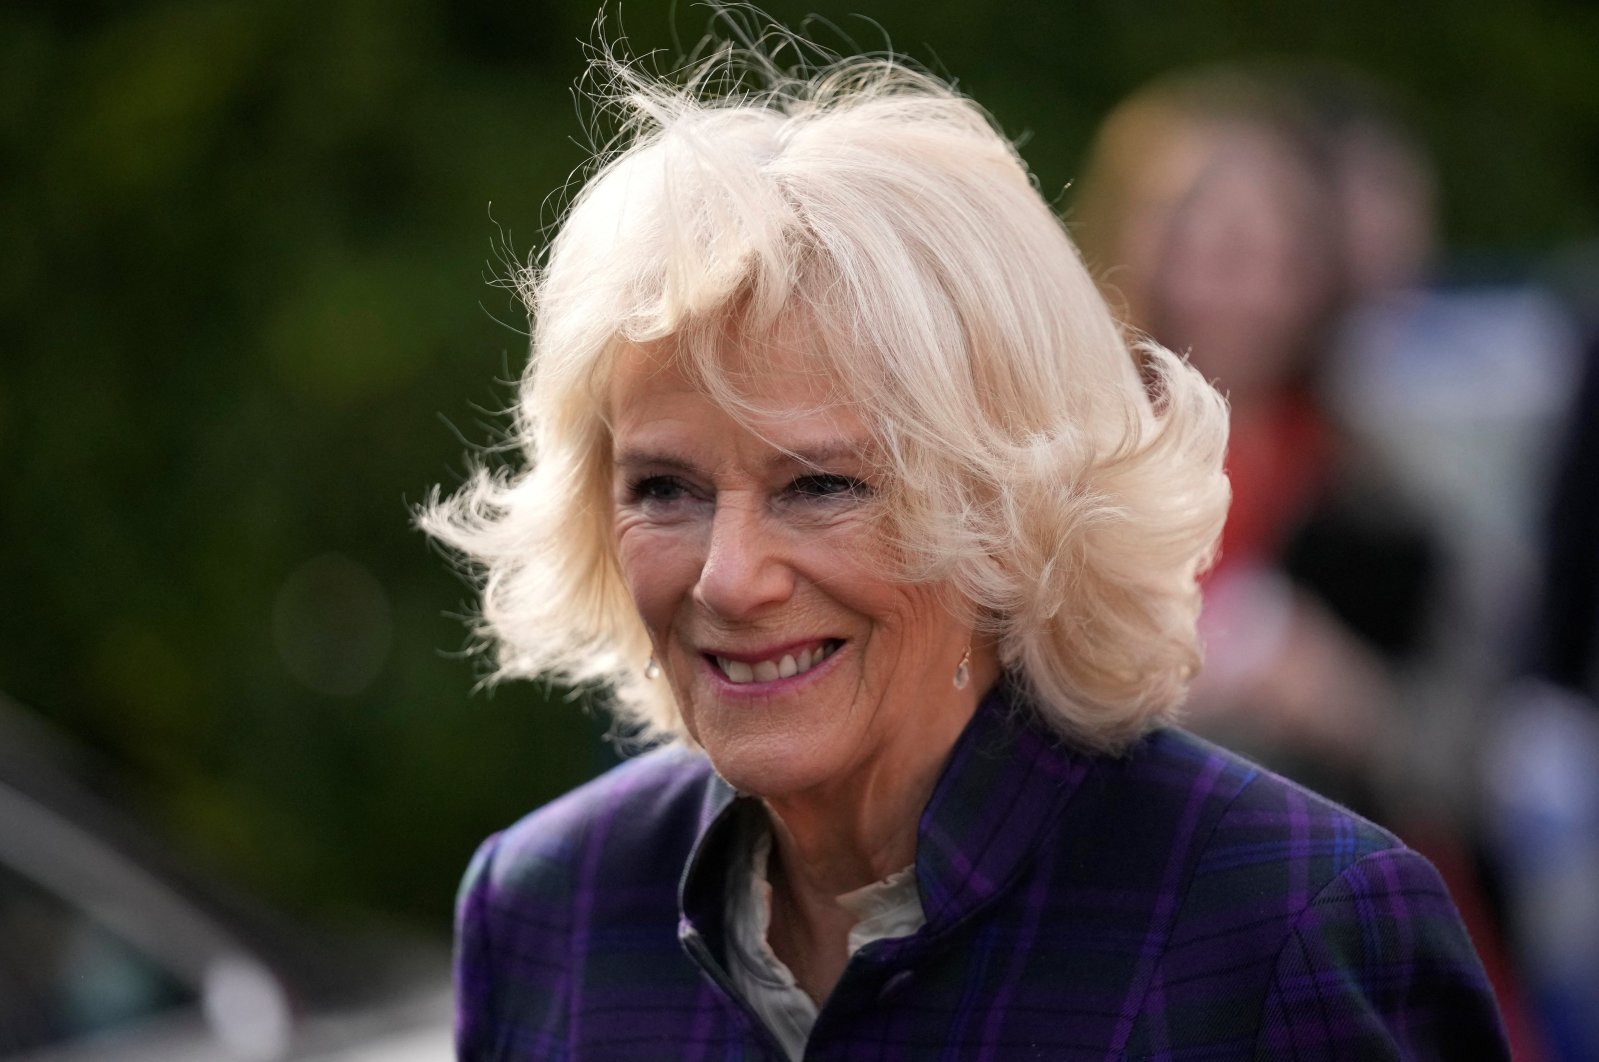 Duchess of Cornwall Camilla arrives at the Thames Valley Partnership charity in Aston Sandford, U.K., Feb. 10, 2022. (Reuters Photo)